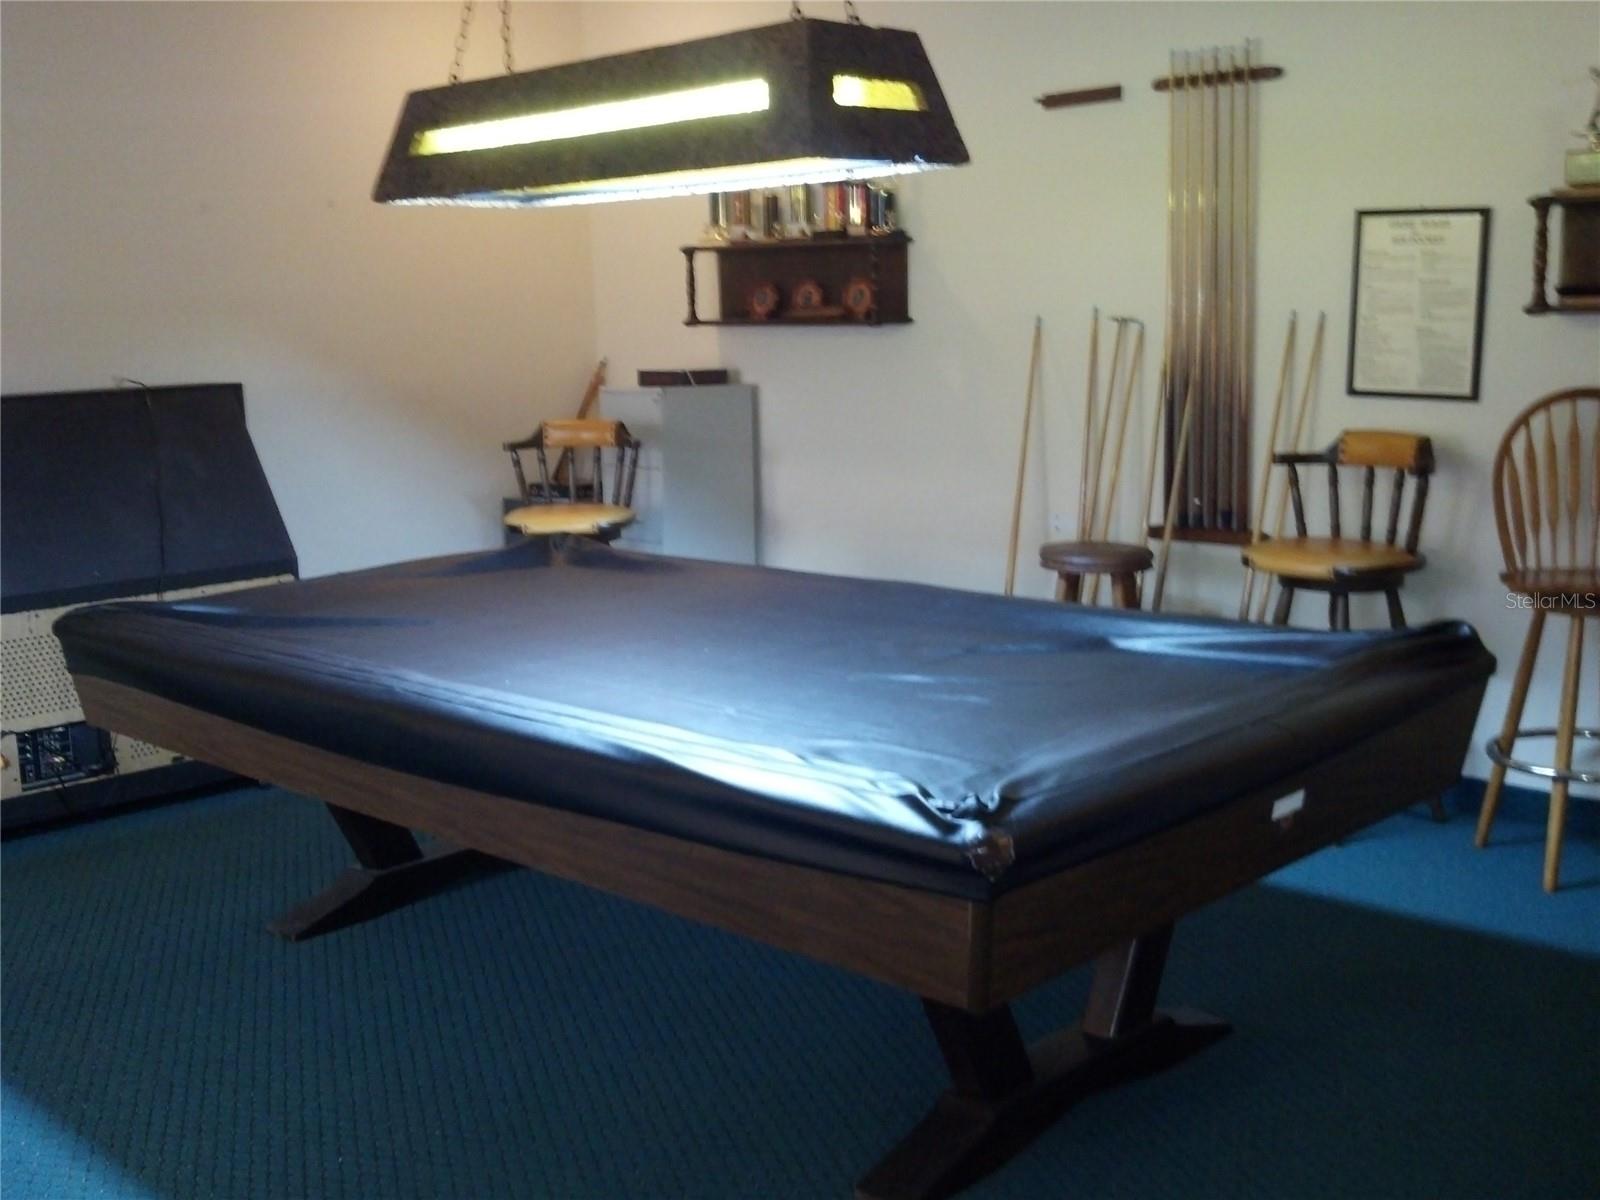 Pool table in game room.